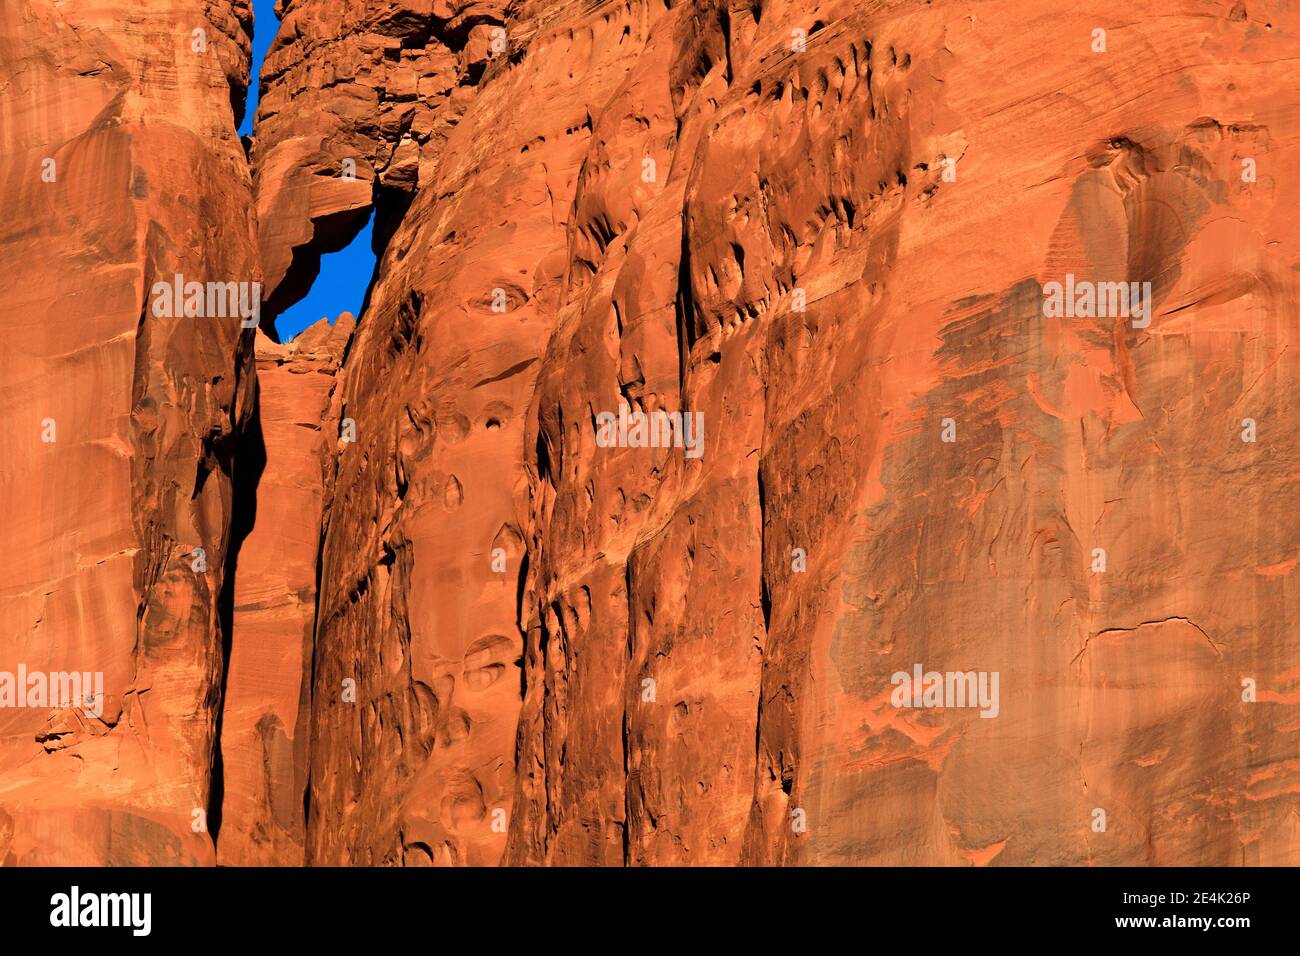 Monument Valley, detail view of a sandstone monolith, arch, window of stone, Utah, USA Stock Photo